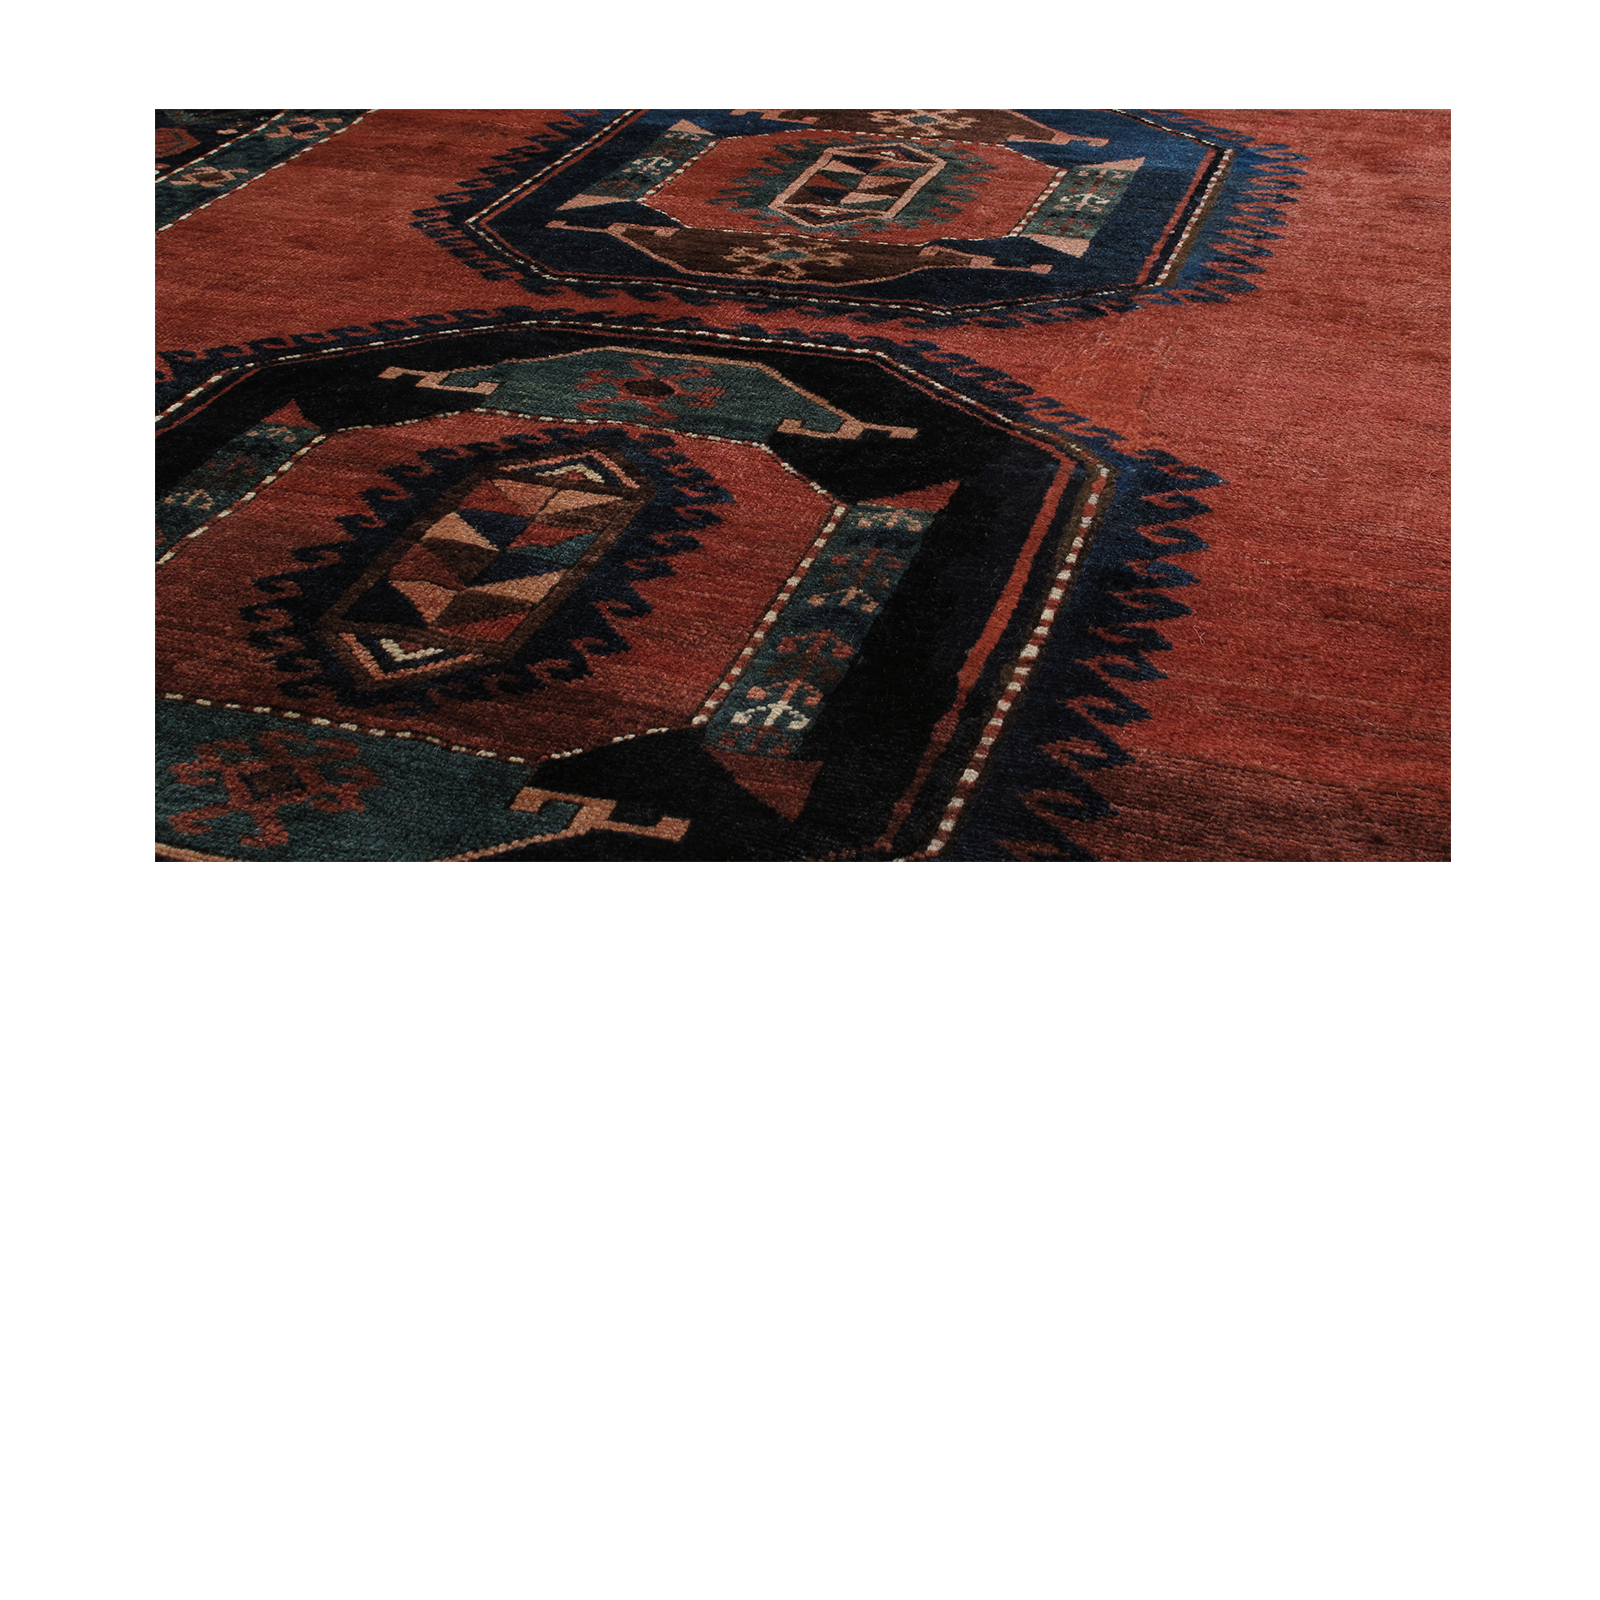 This Antique Caucasian tribal rug is from Azerbaijan, a country located in the south Caucasus region.